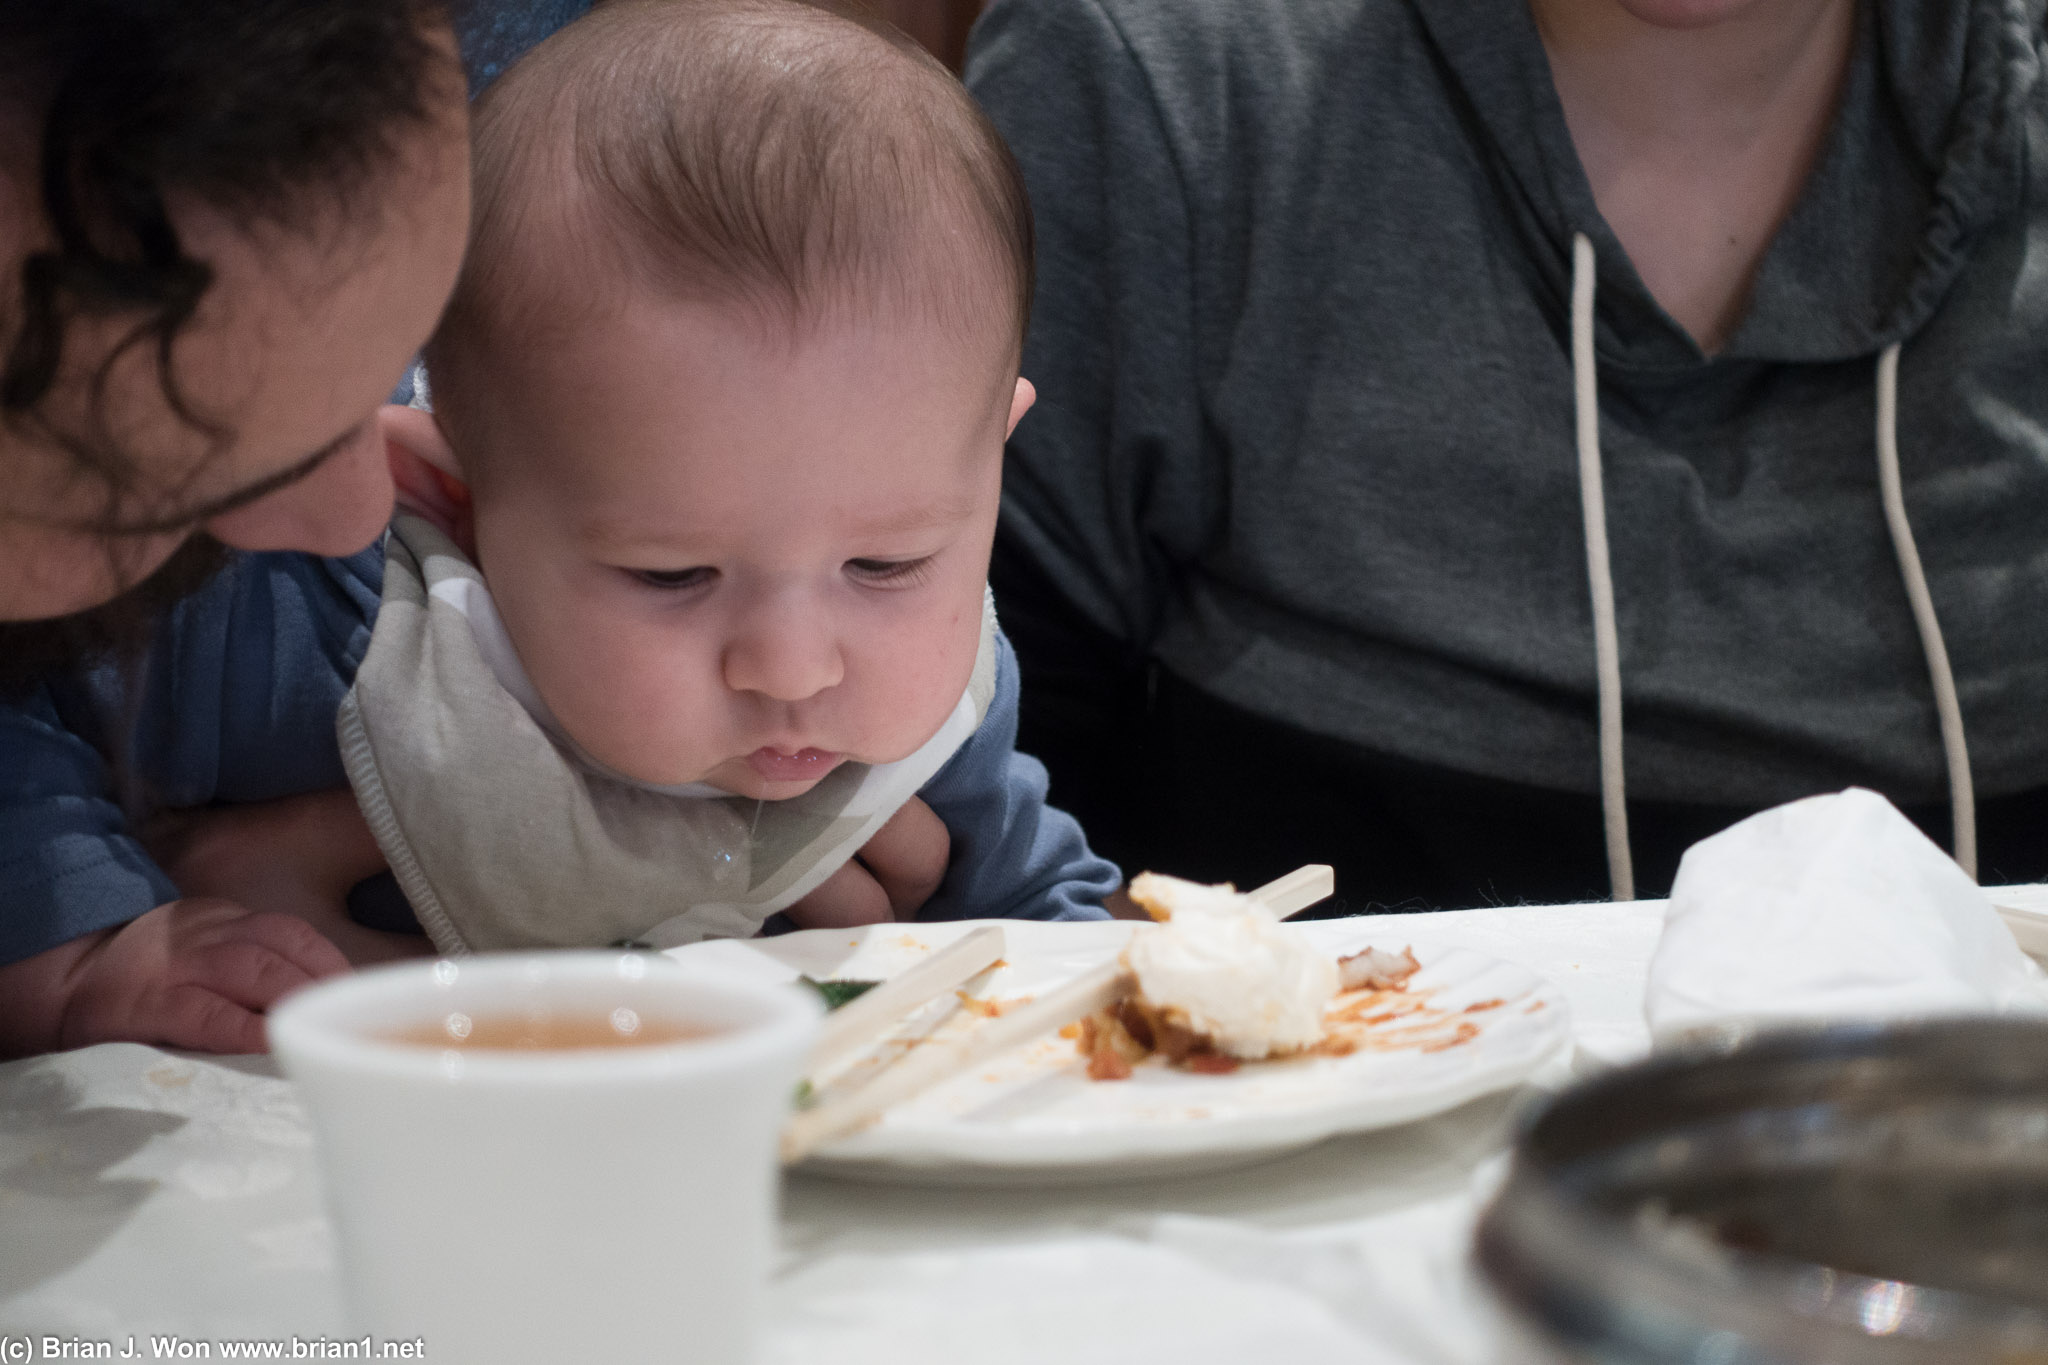 Baby Tony was very interested in dim sum.